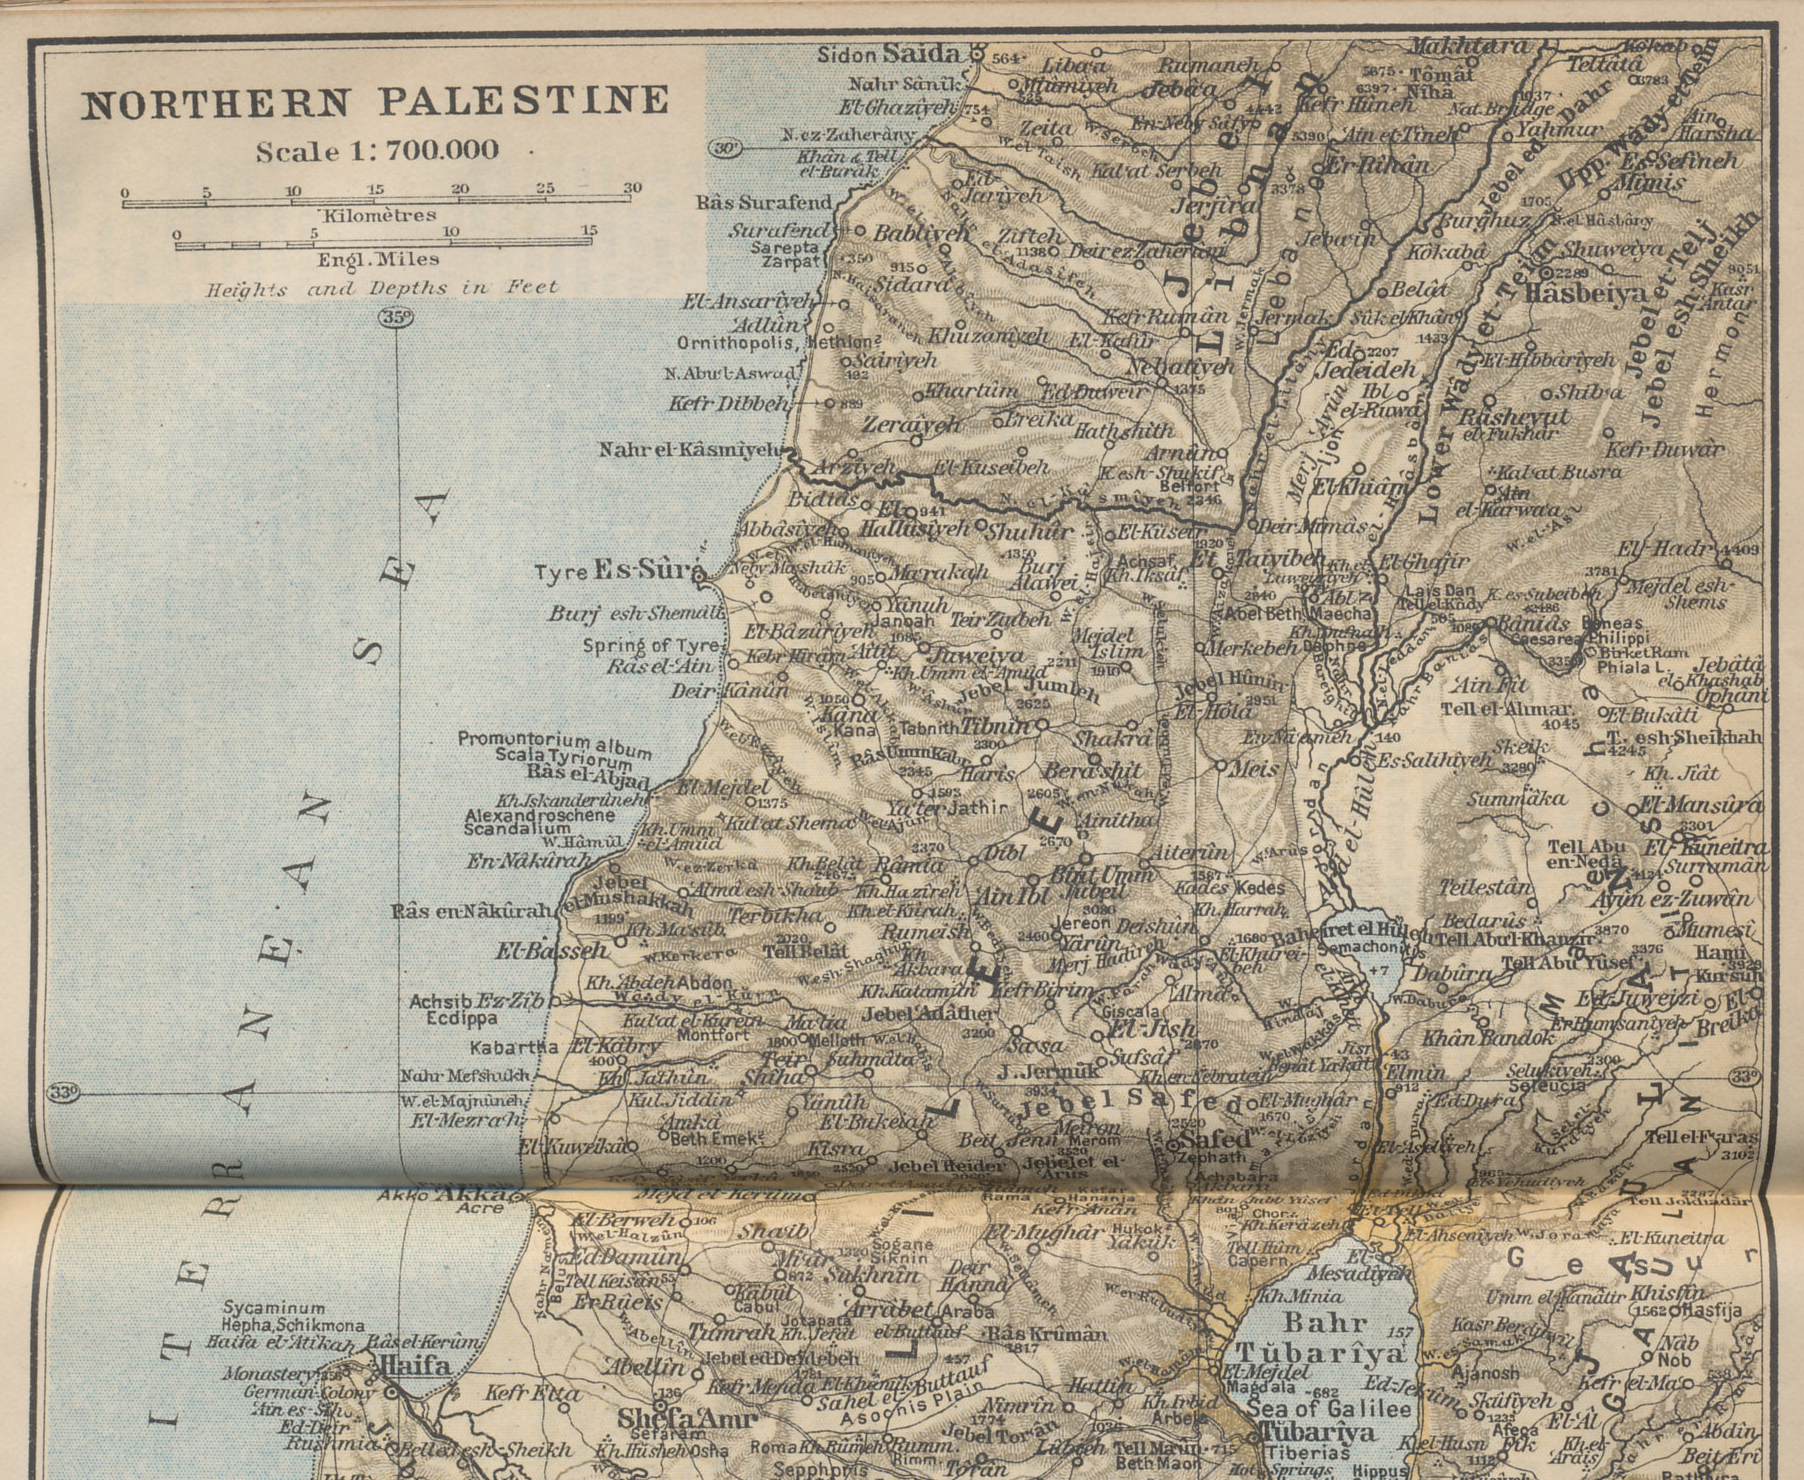 Northern Palestine (northern portion) from 'Palestine and Syria with Routes through Mesopotamia and Babylonia and with the Island of Cyprus' by Karl Baedeker
Text:
Northern Palestine
Scale 1:700,000